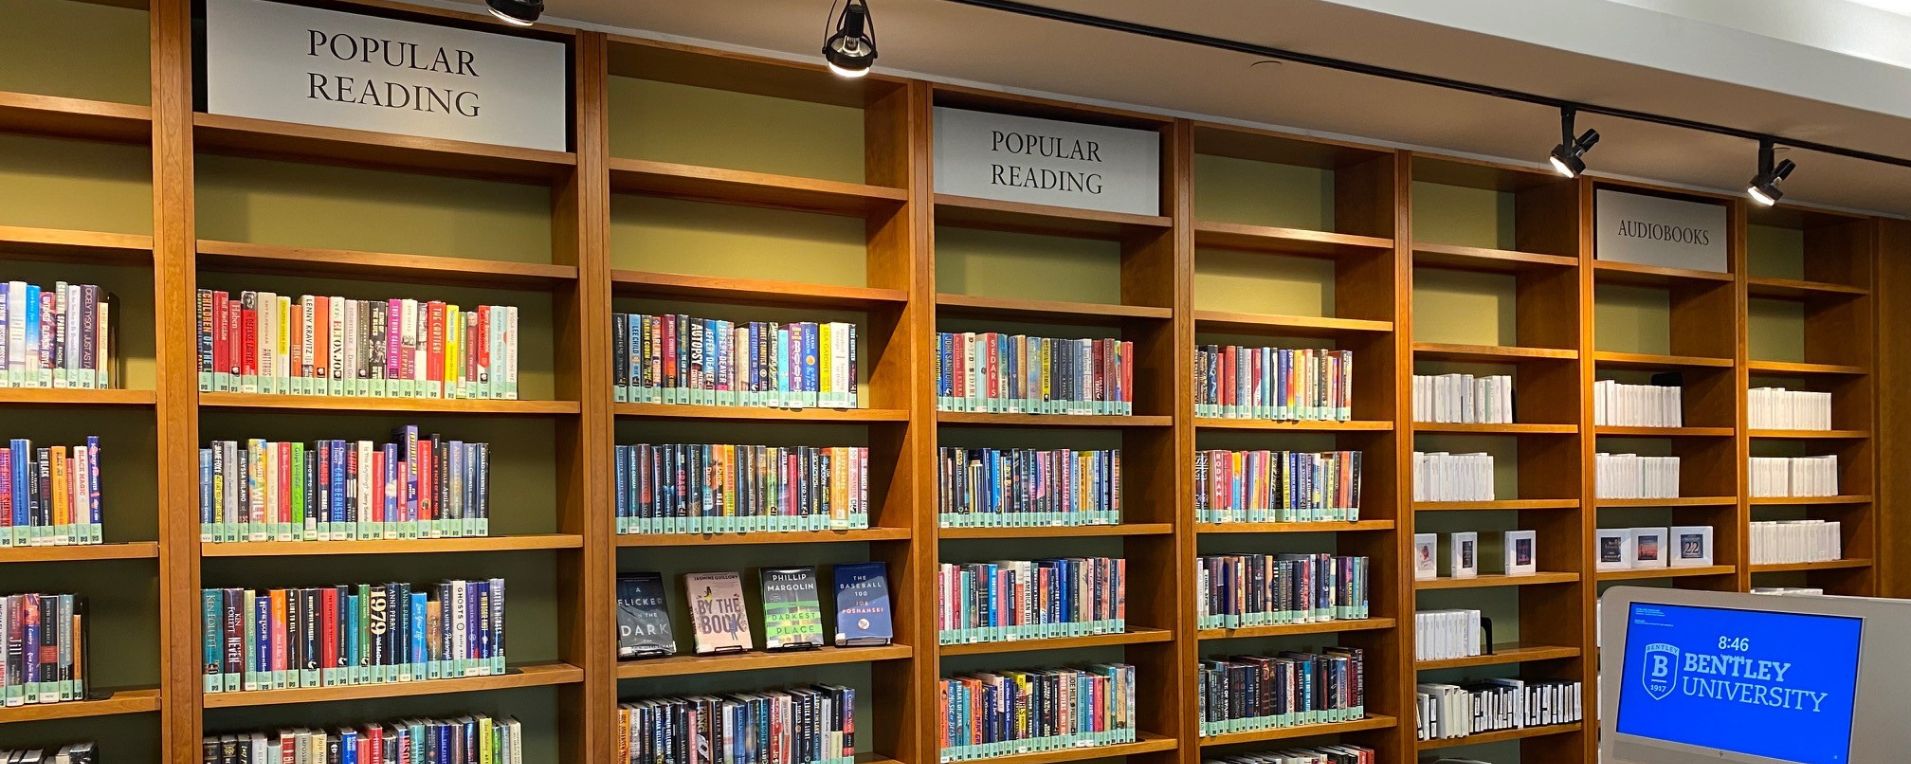 popular reading and audiobook shelves